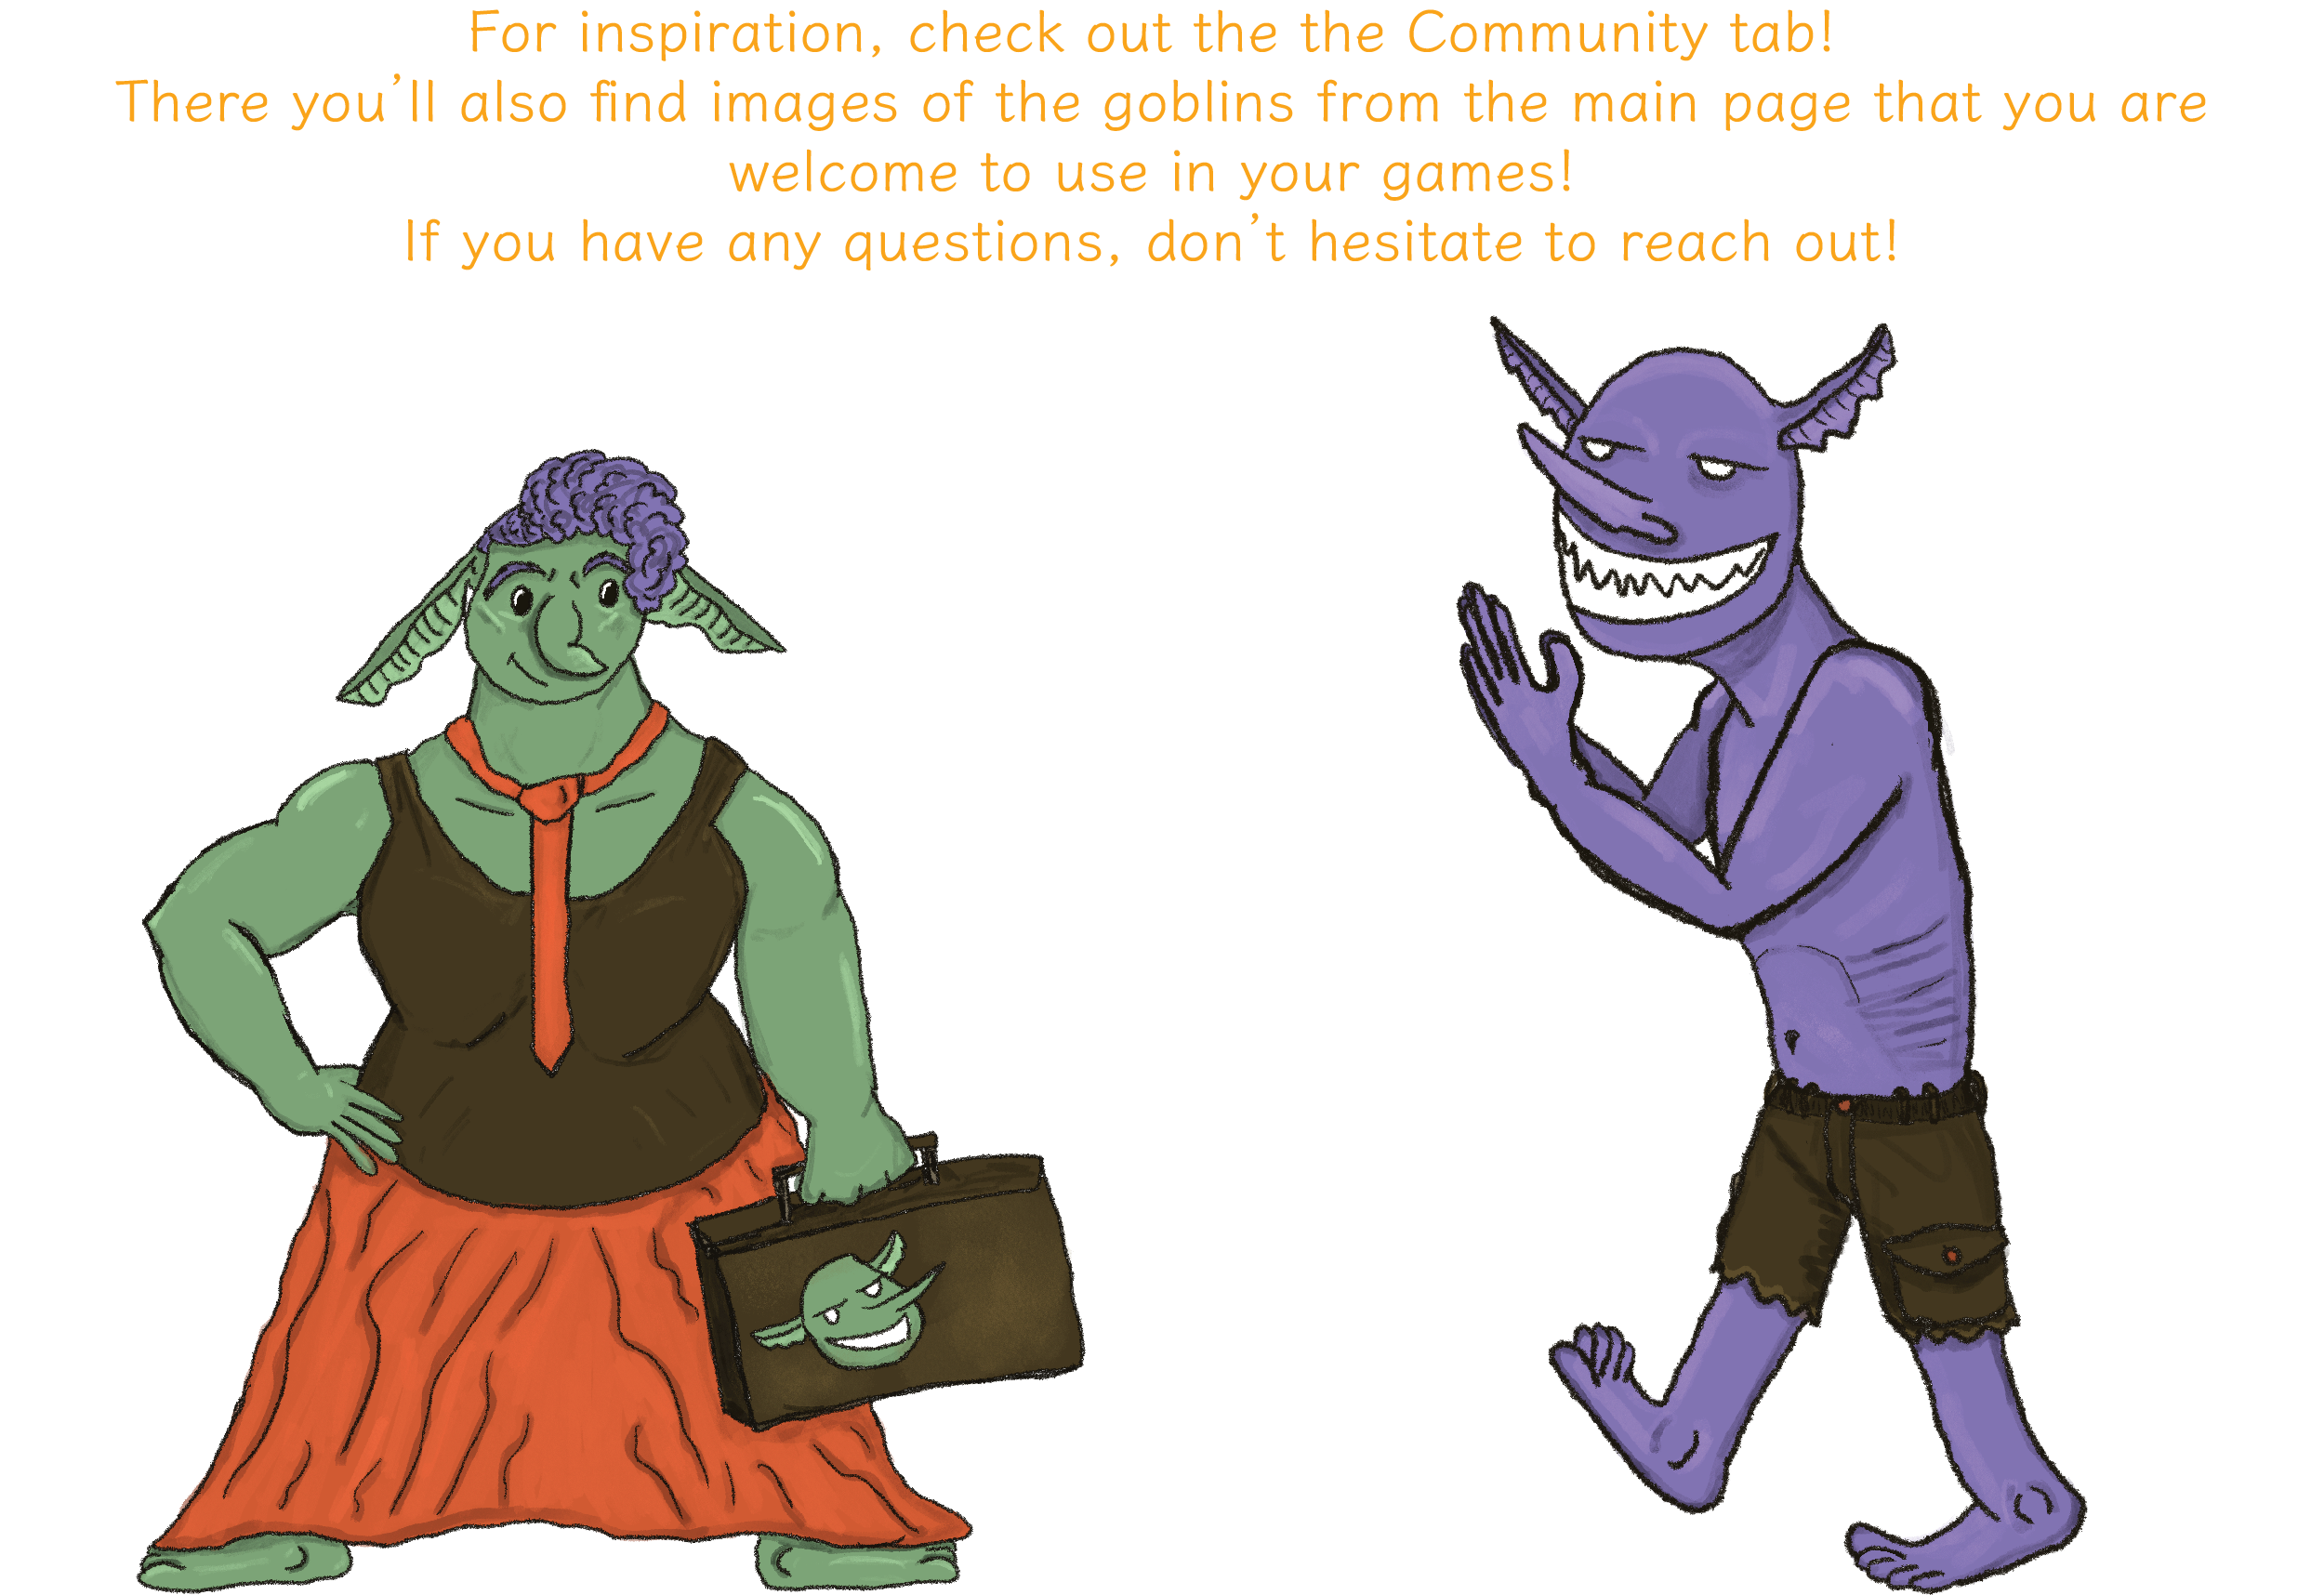 If you have any questions, don't hesitate to reach out! And check out the community tab for some more goblin inspiration! Plus images of two final goblins, Switchgrass Switchblade (bombastic, winsome, toothy) and Bav (patchy, pretty, professional)